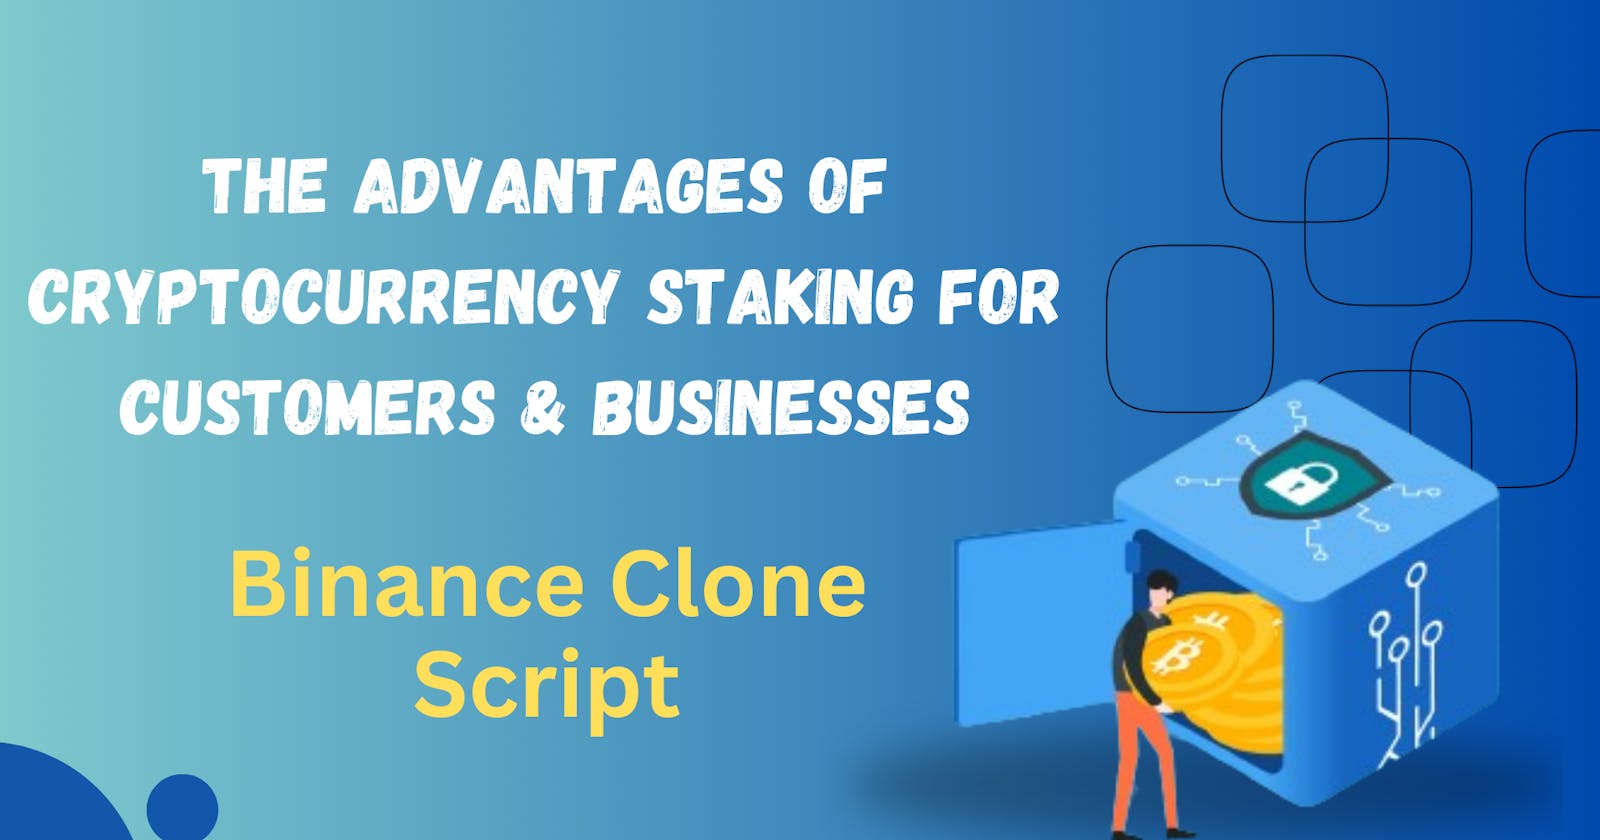 The Advantages of Binance Clone Script Staking for Customers & Businesses